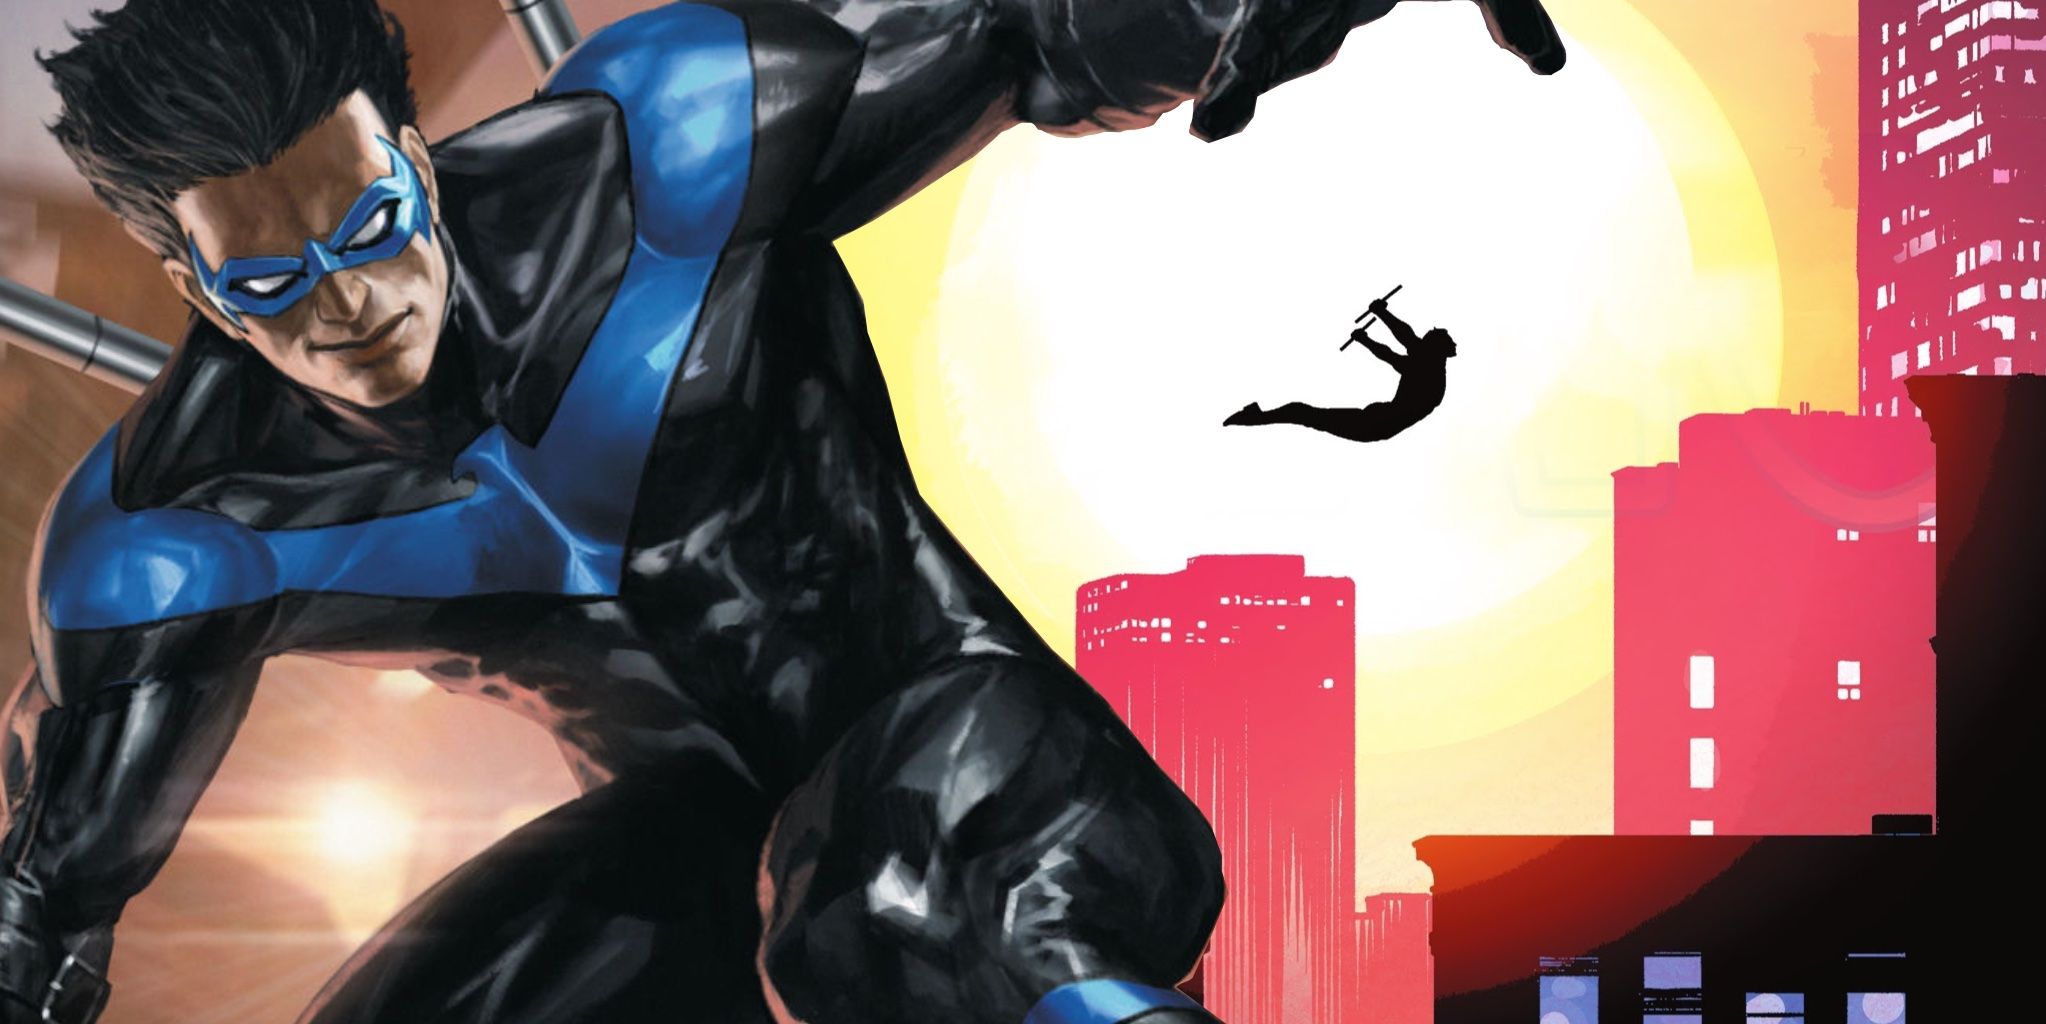 Nightwing jumping over buildings in the comics